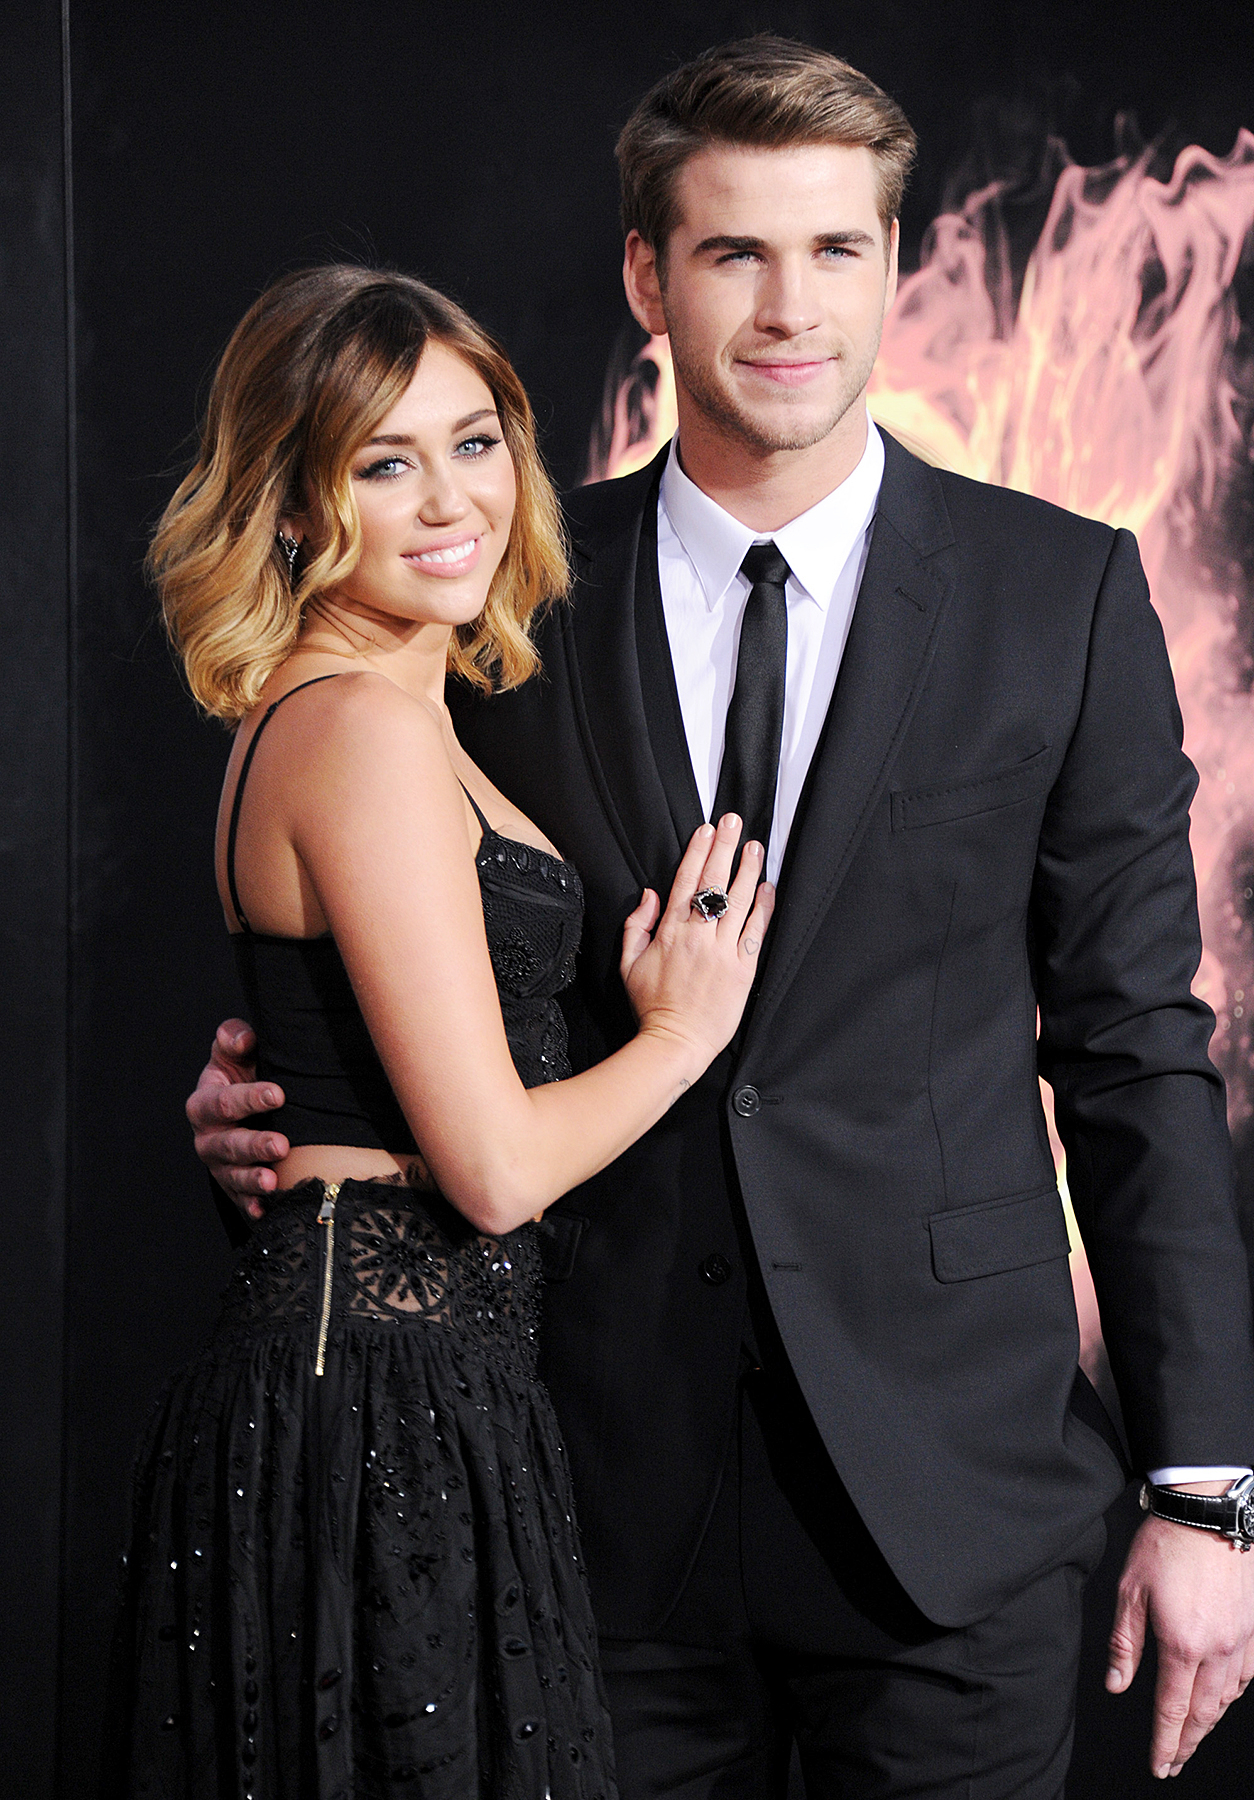 Miley Cyrus and Liam Hemsworth Relationship Timeline image